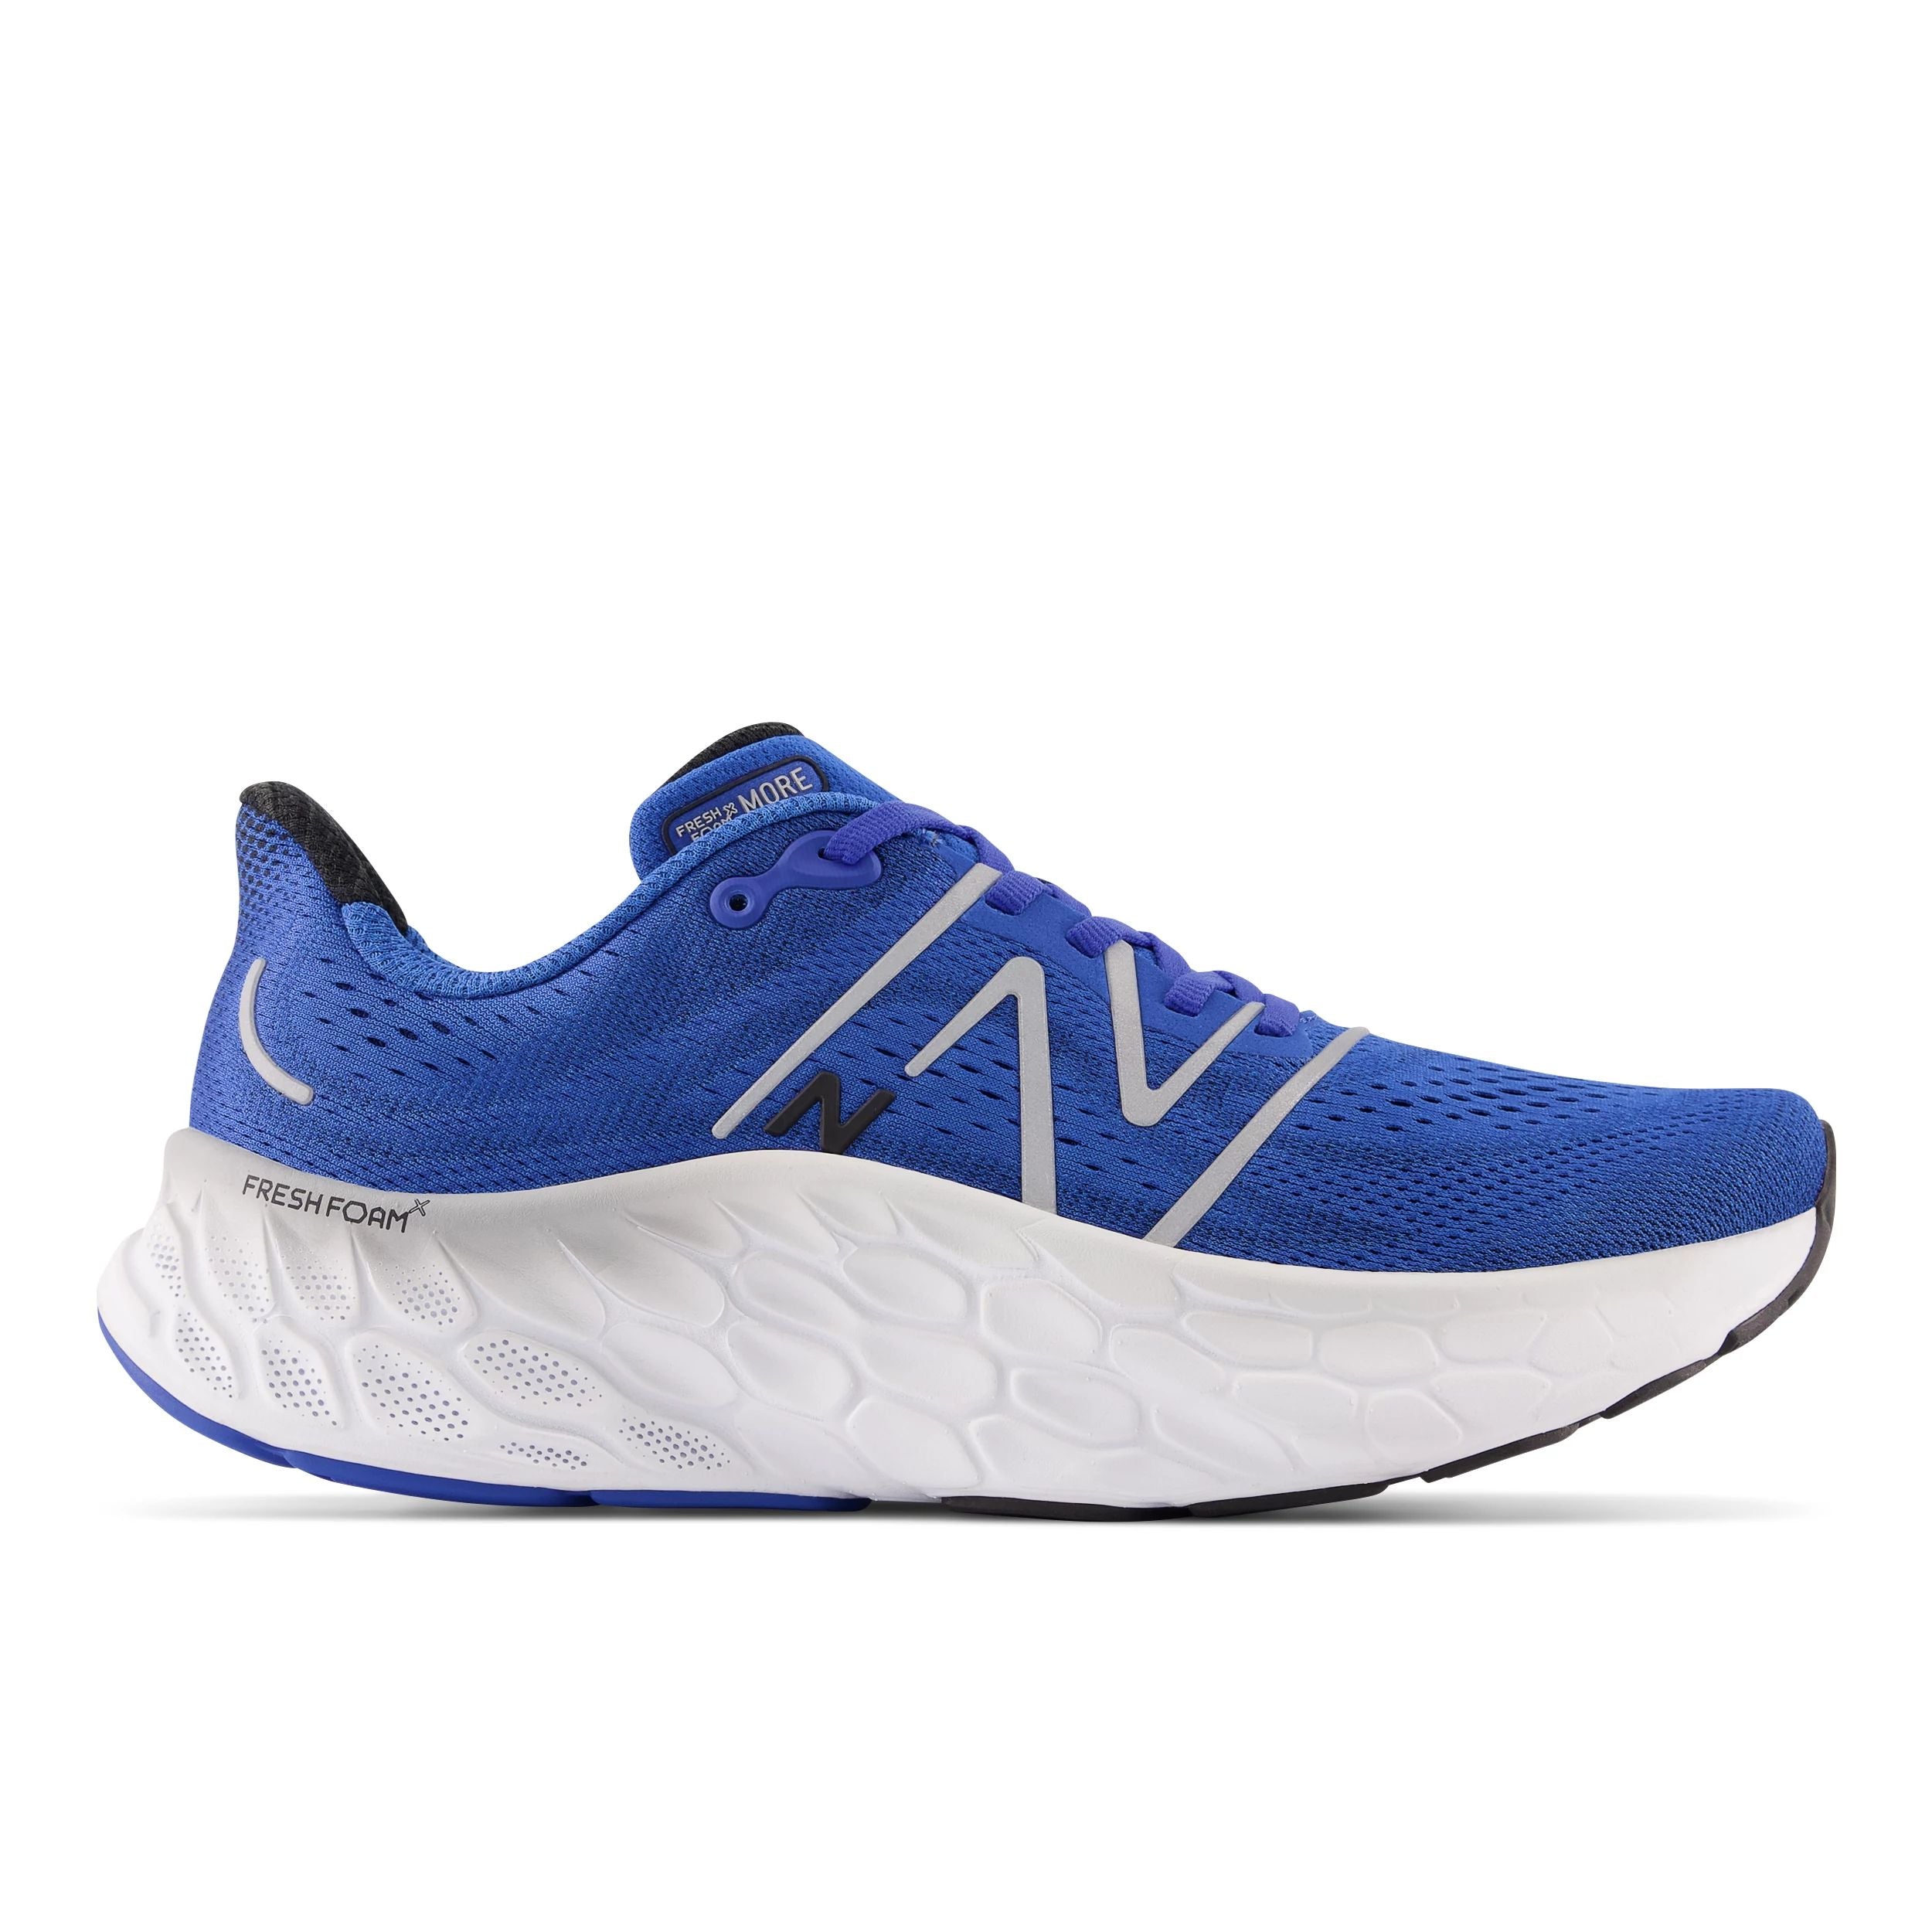 Lateral view of the Men's New Balance Fresh Foam More 4 in Cobalt/Black